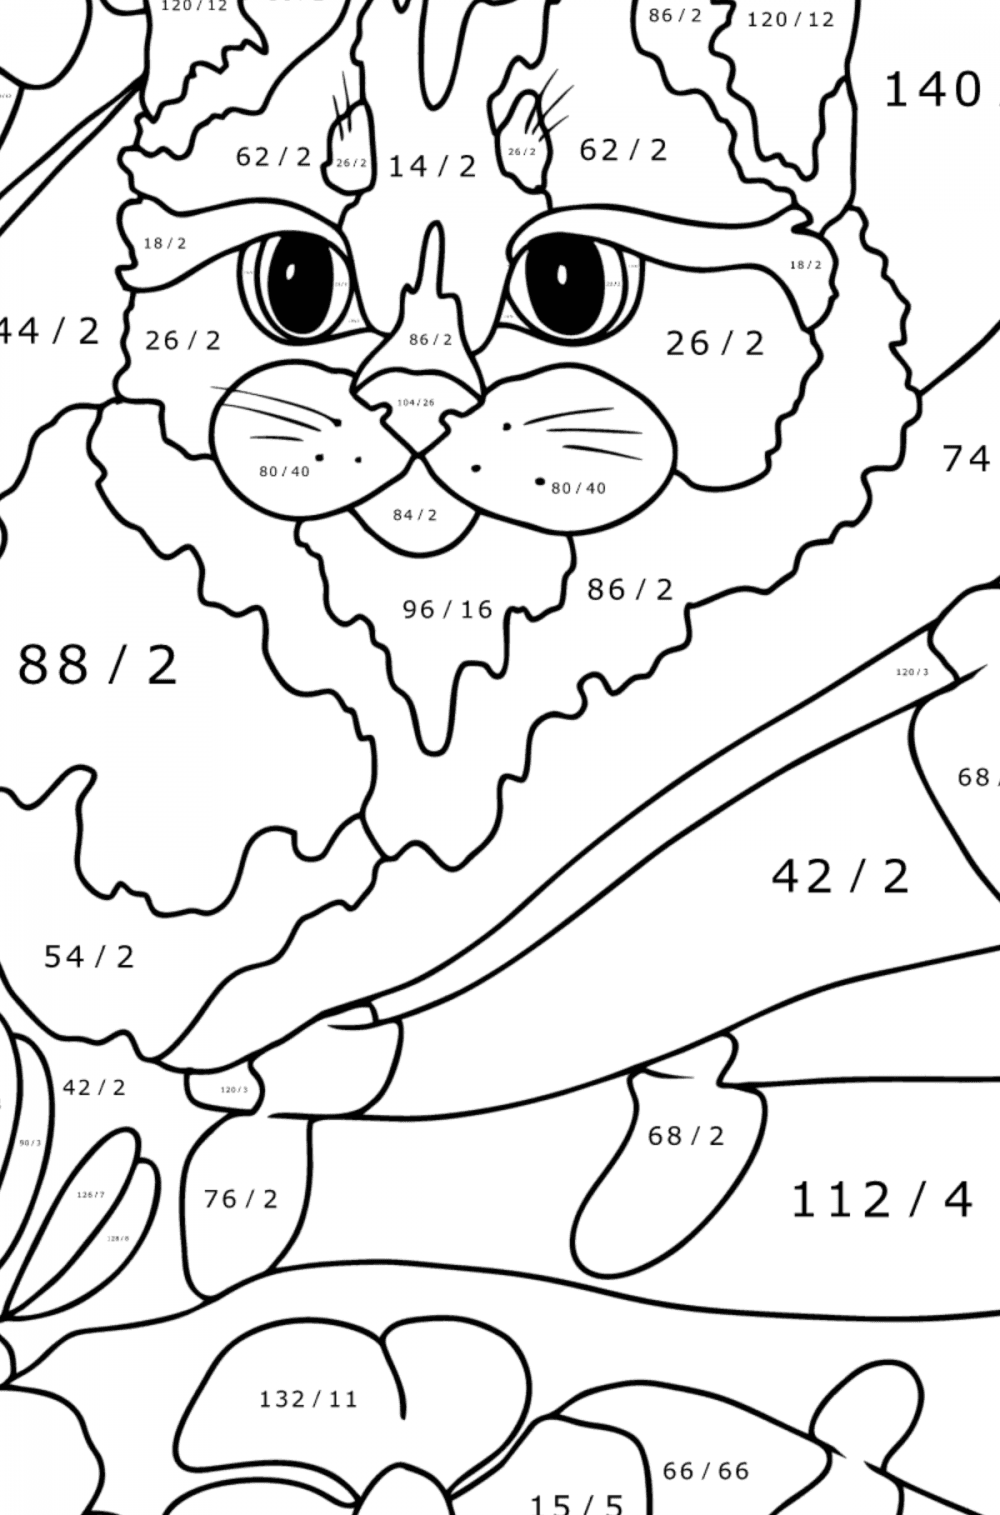 Gray kitten - Cats Coloring pages for Adults Online and Print